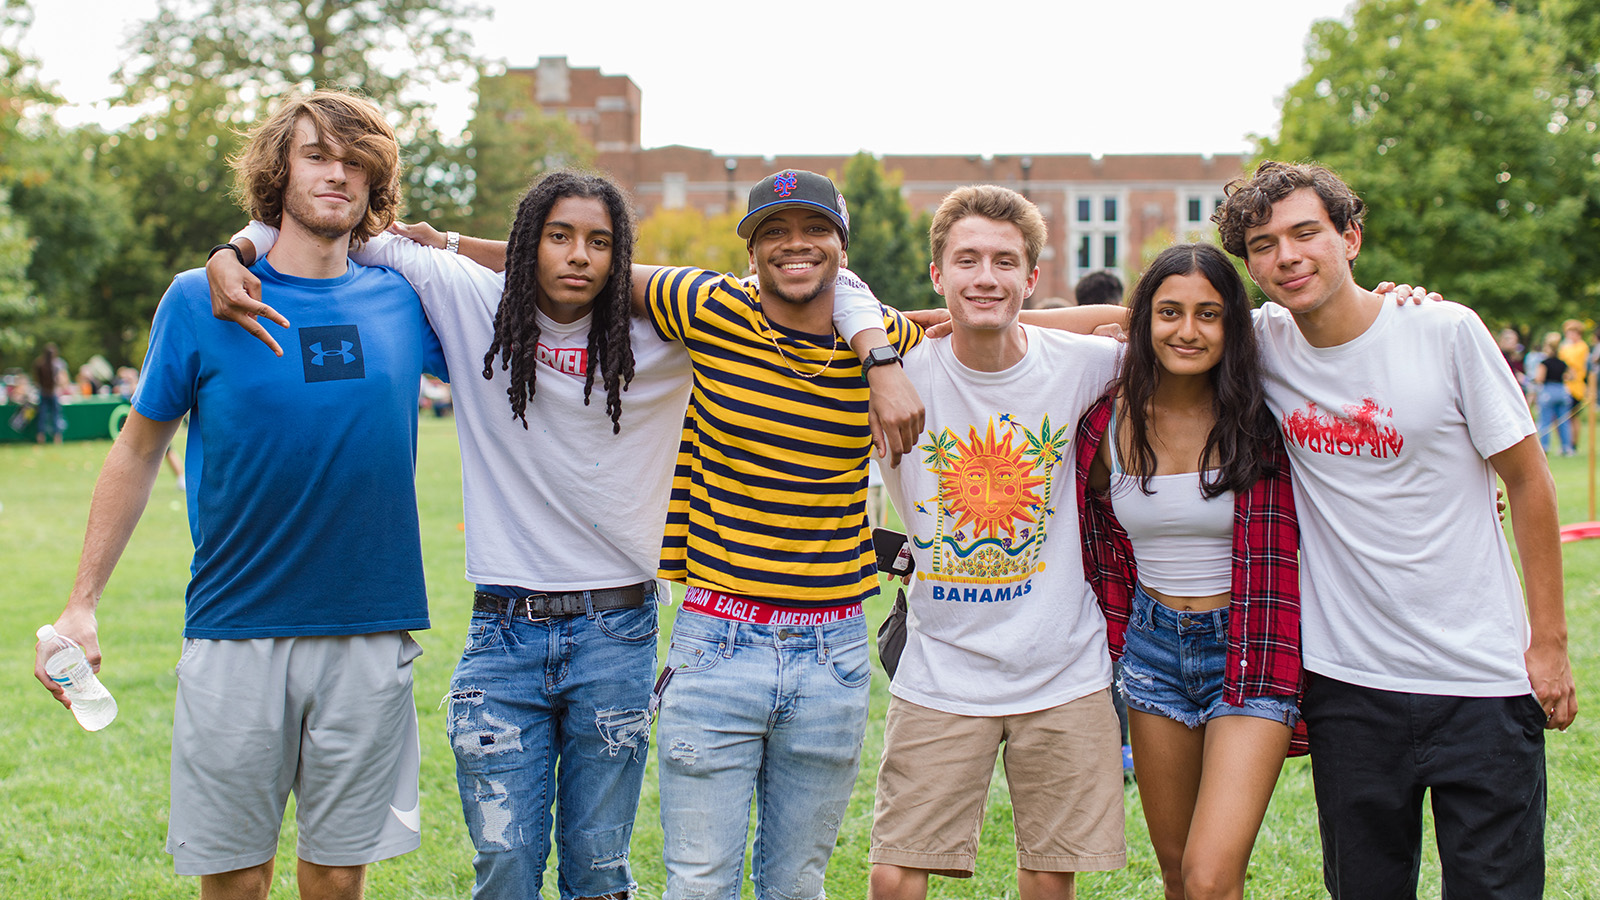 A group of students poses for a photo on the Back Quad.